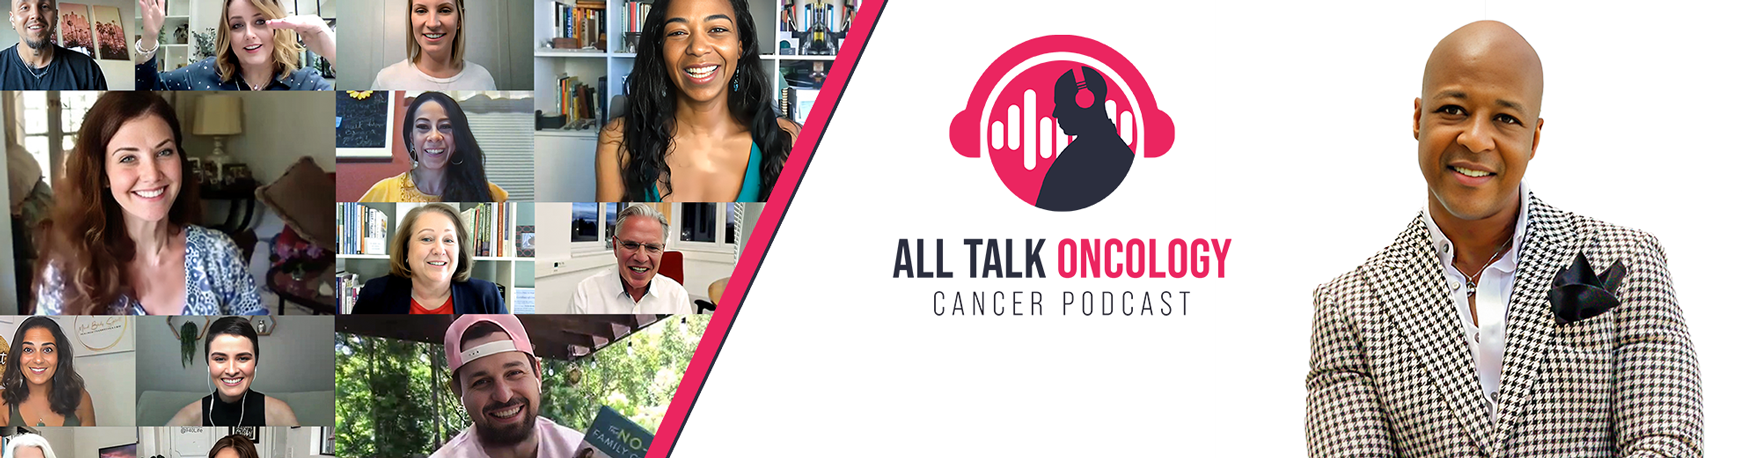 All Talk Oncology Podcast